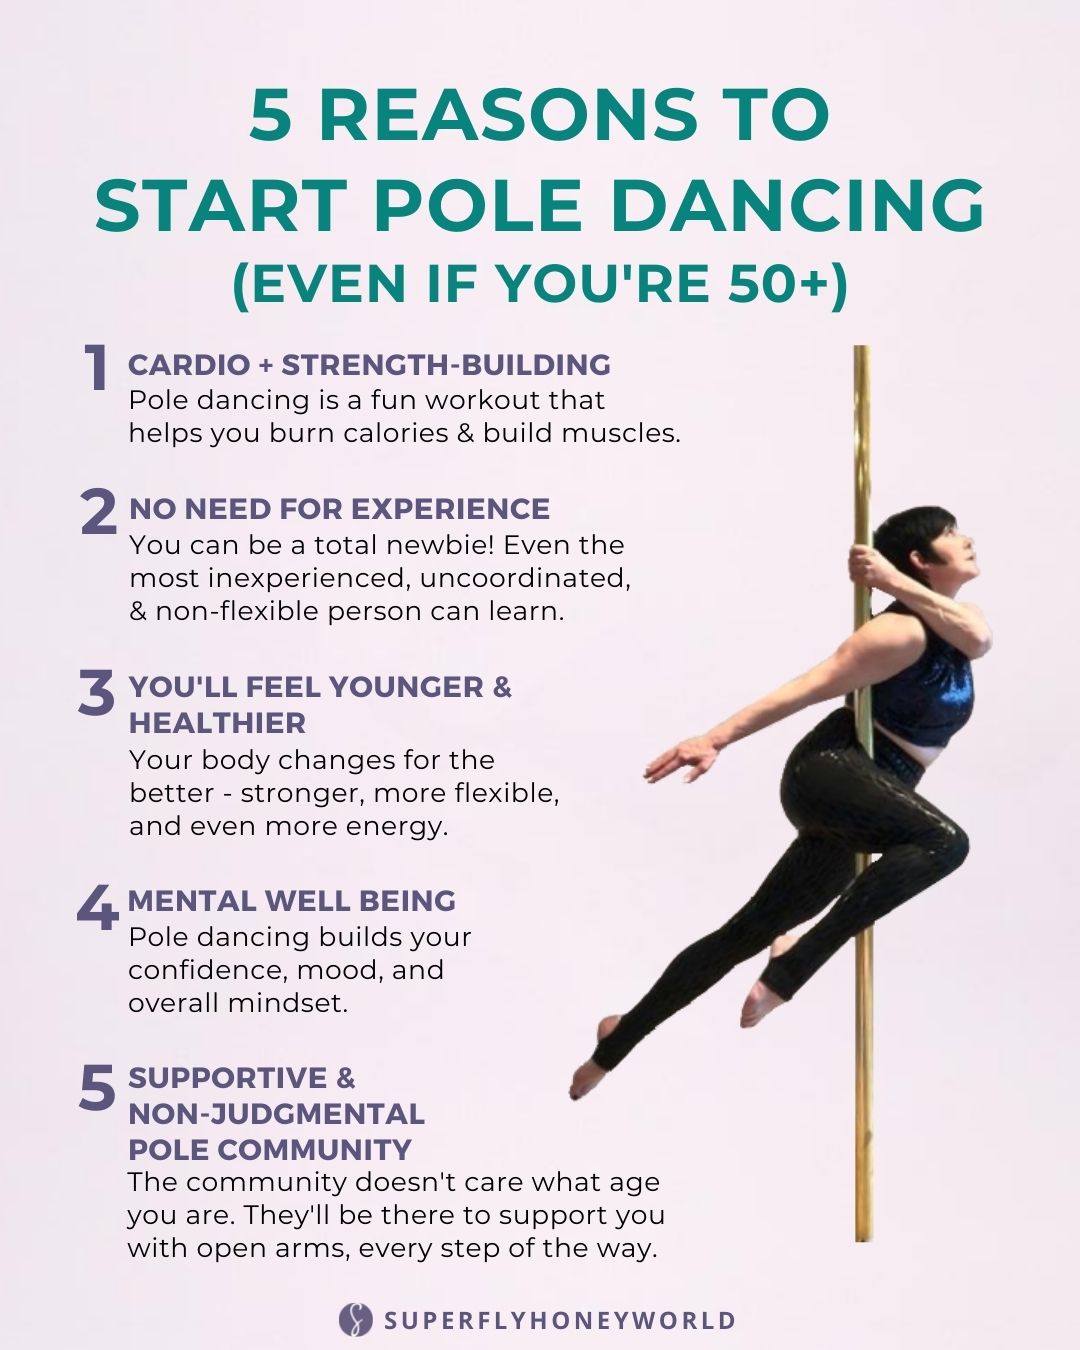 5 Reasons To Start Pole Dancing (Even if You're 50+) - Super Fly